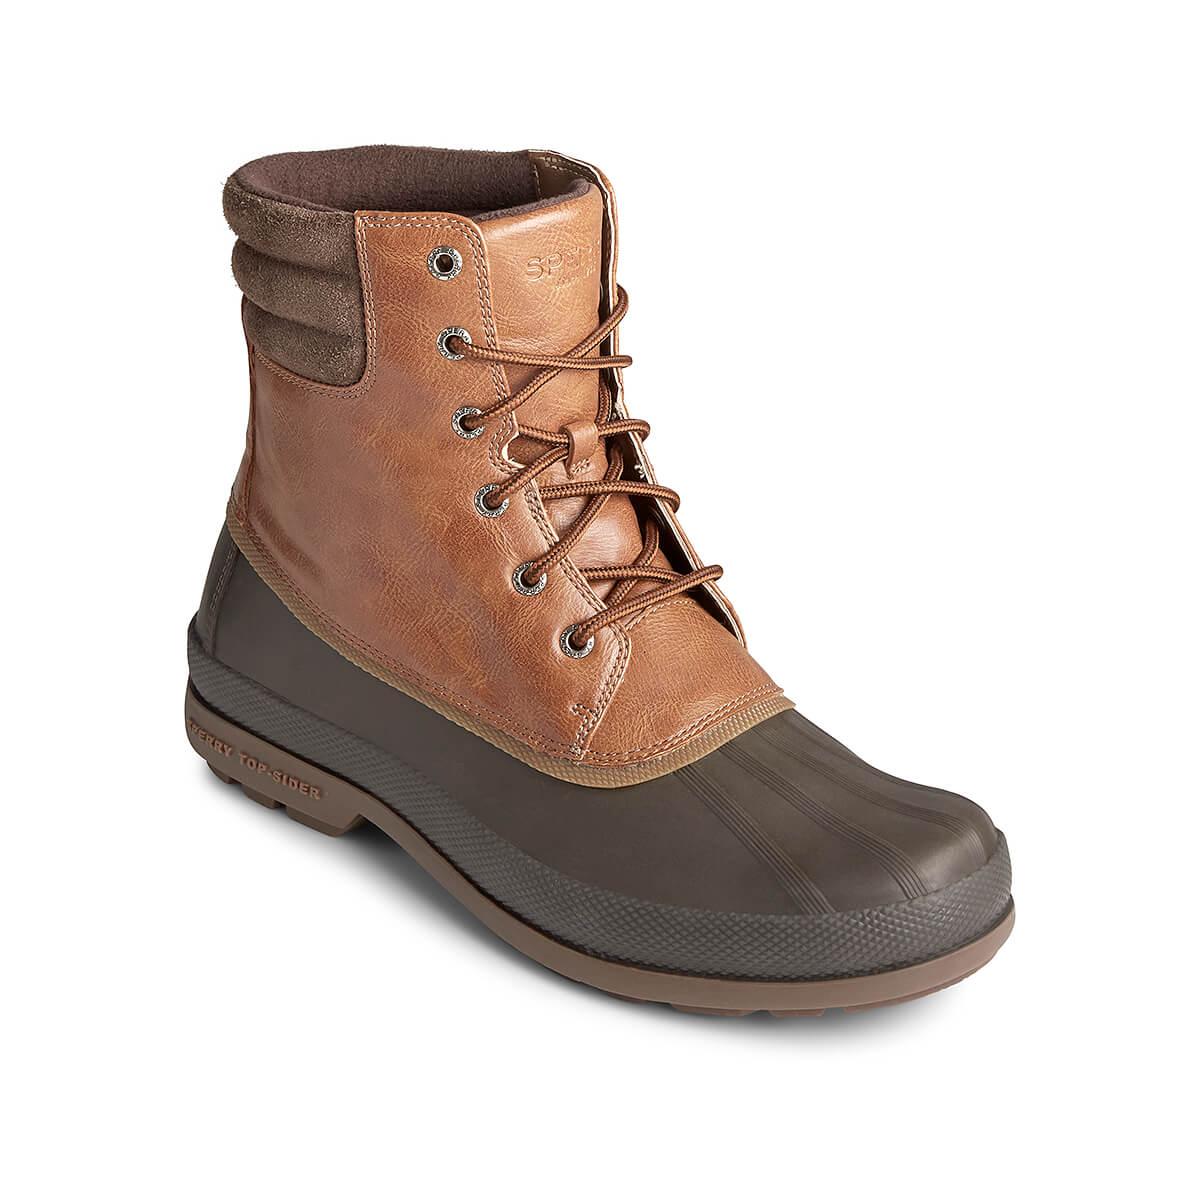 Men's Cold Bay Duck Boots